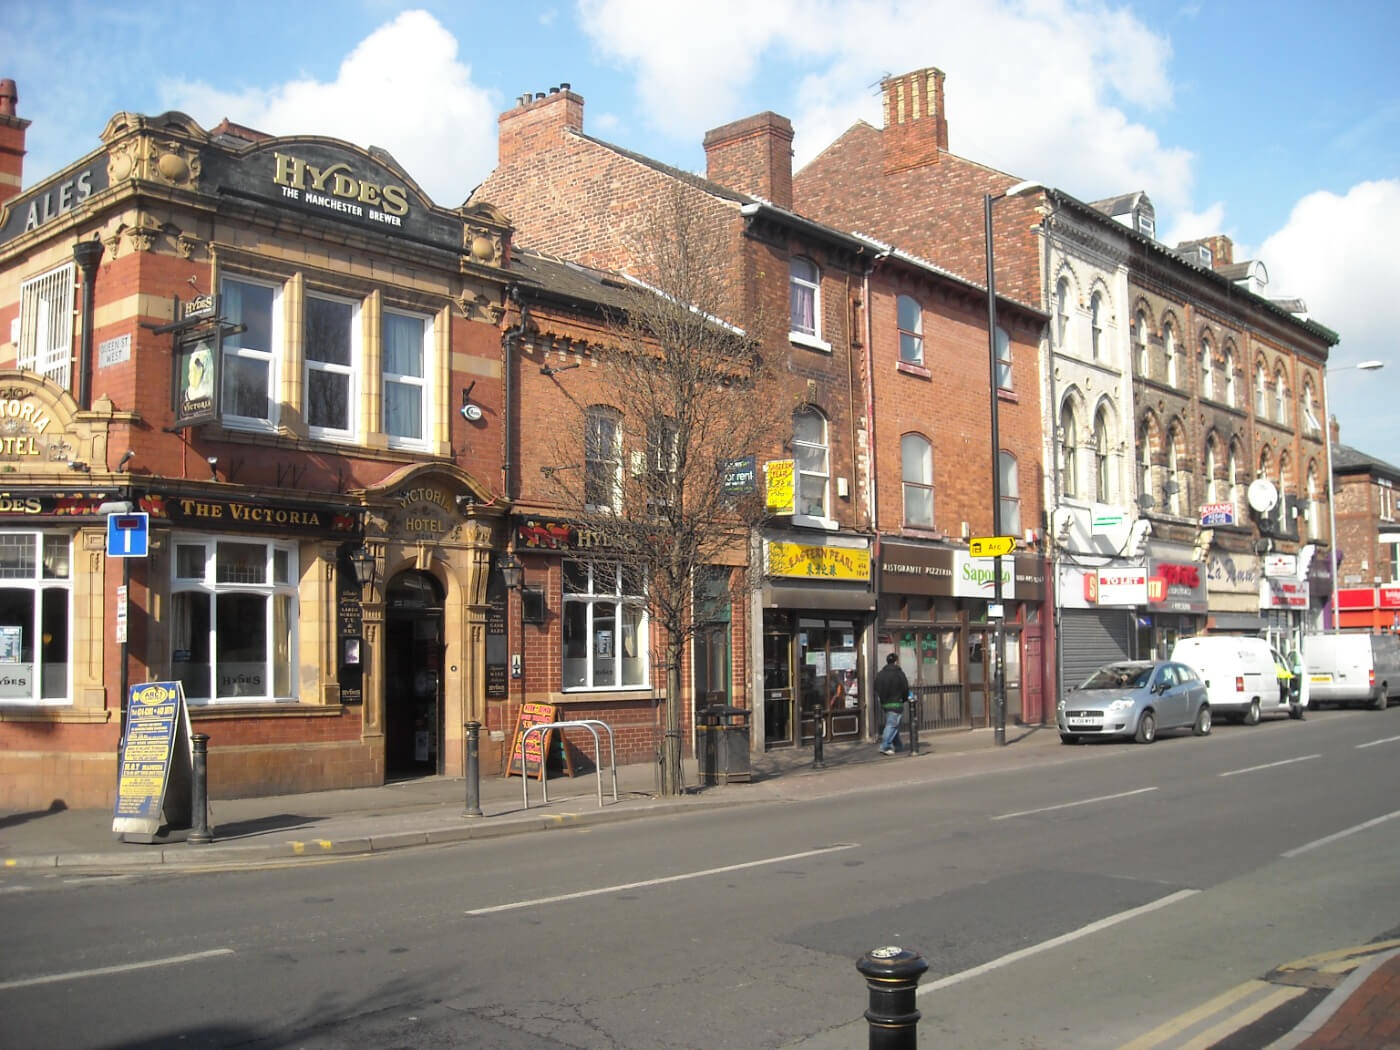 Student Accommodation in Withington, Manchester - The Victoria pub on Wilmslow Road